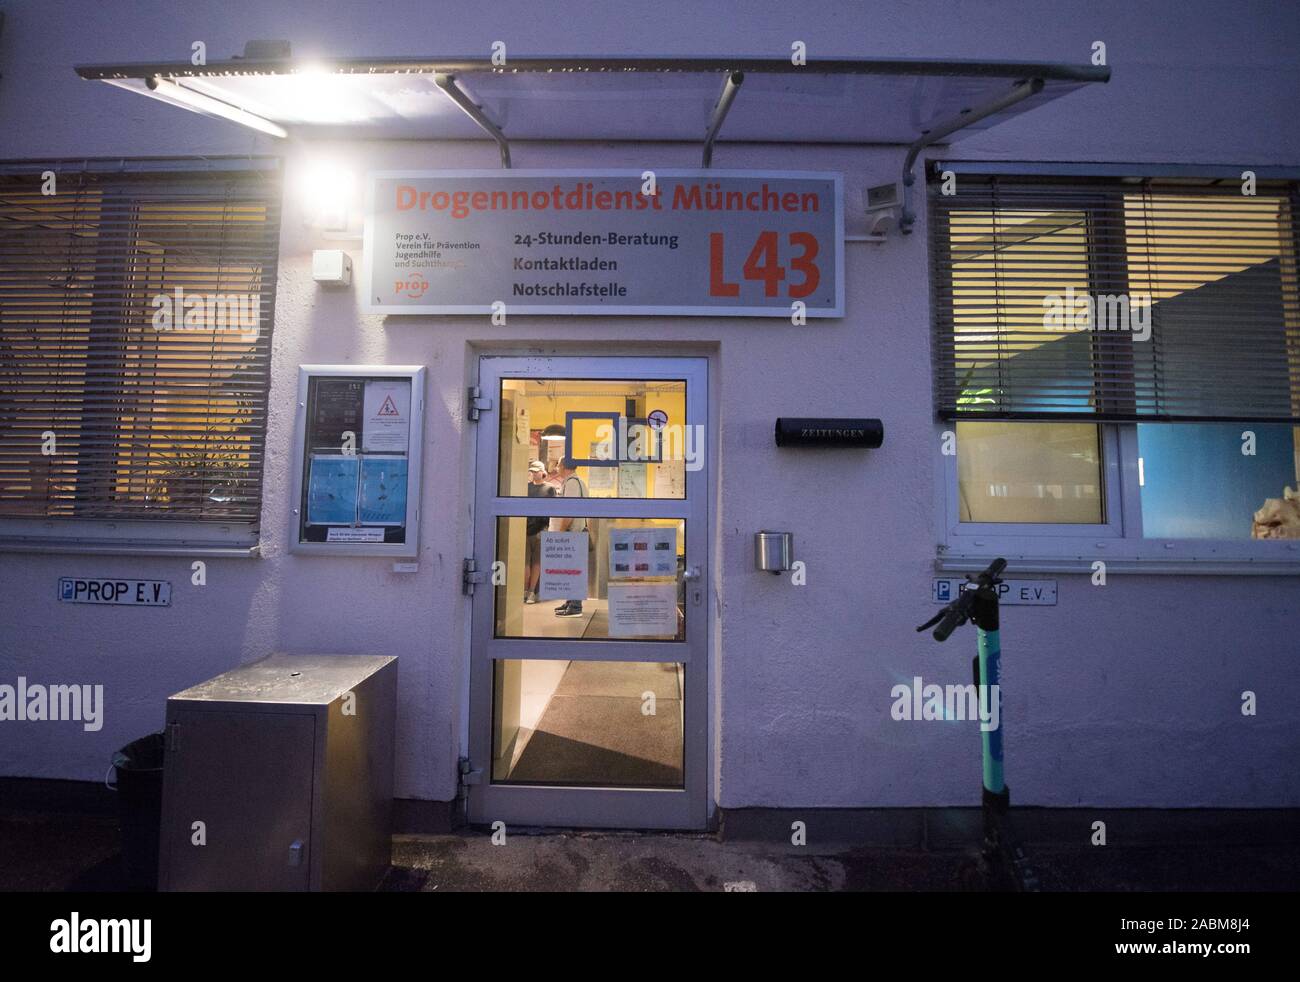 Premises of the drug emergency service L43 of prop e.v. in Munich. [automated translation] Stock Photo